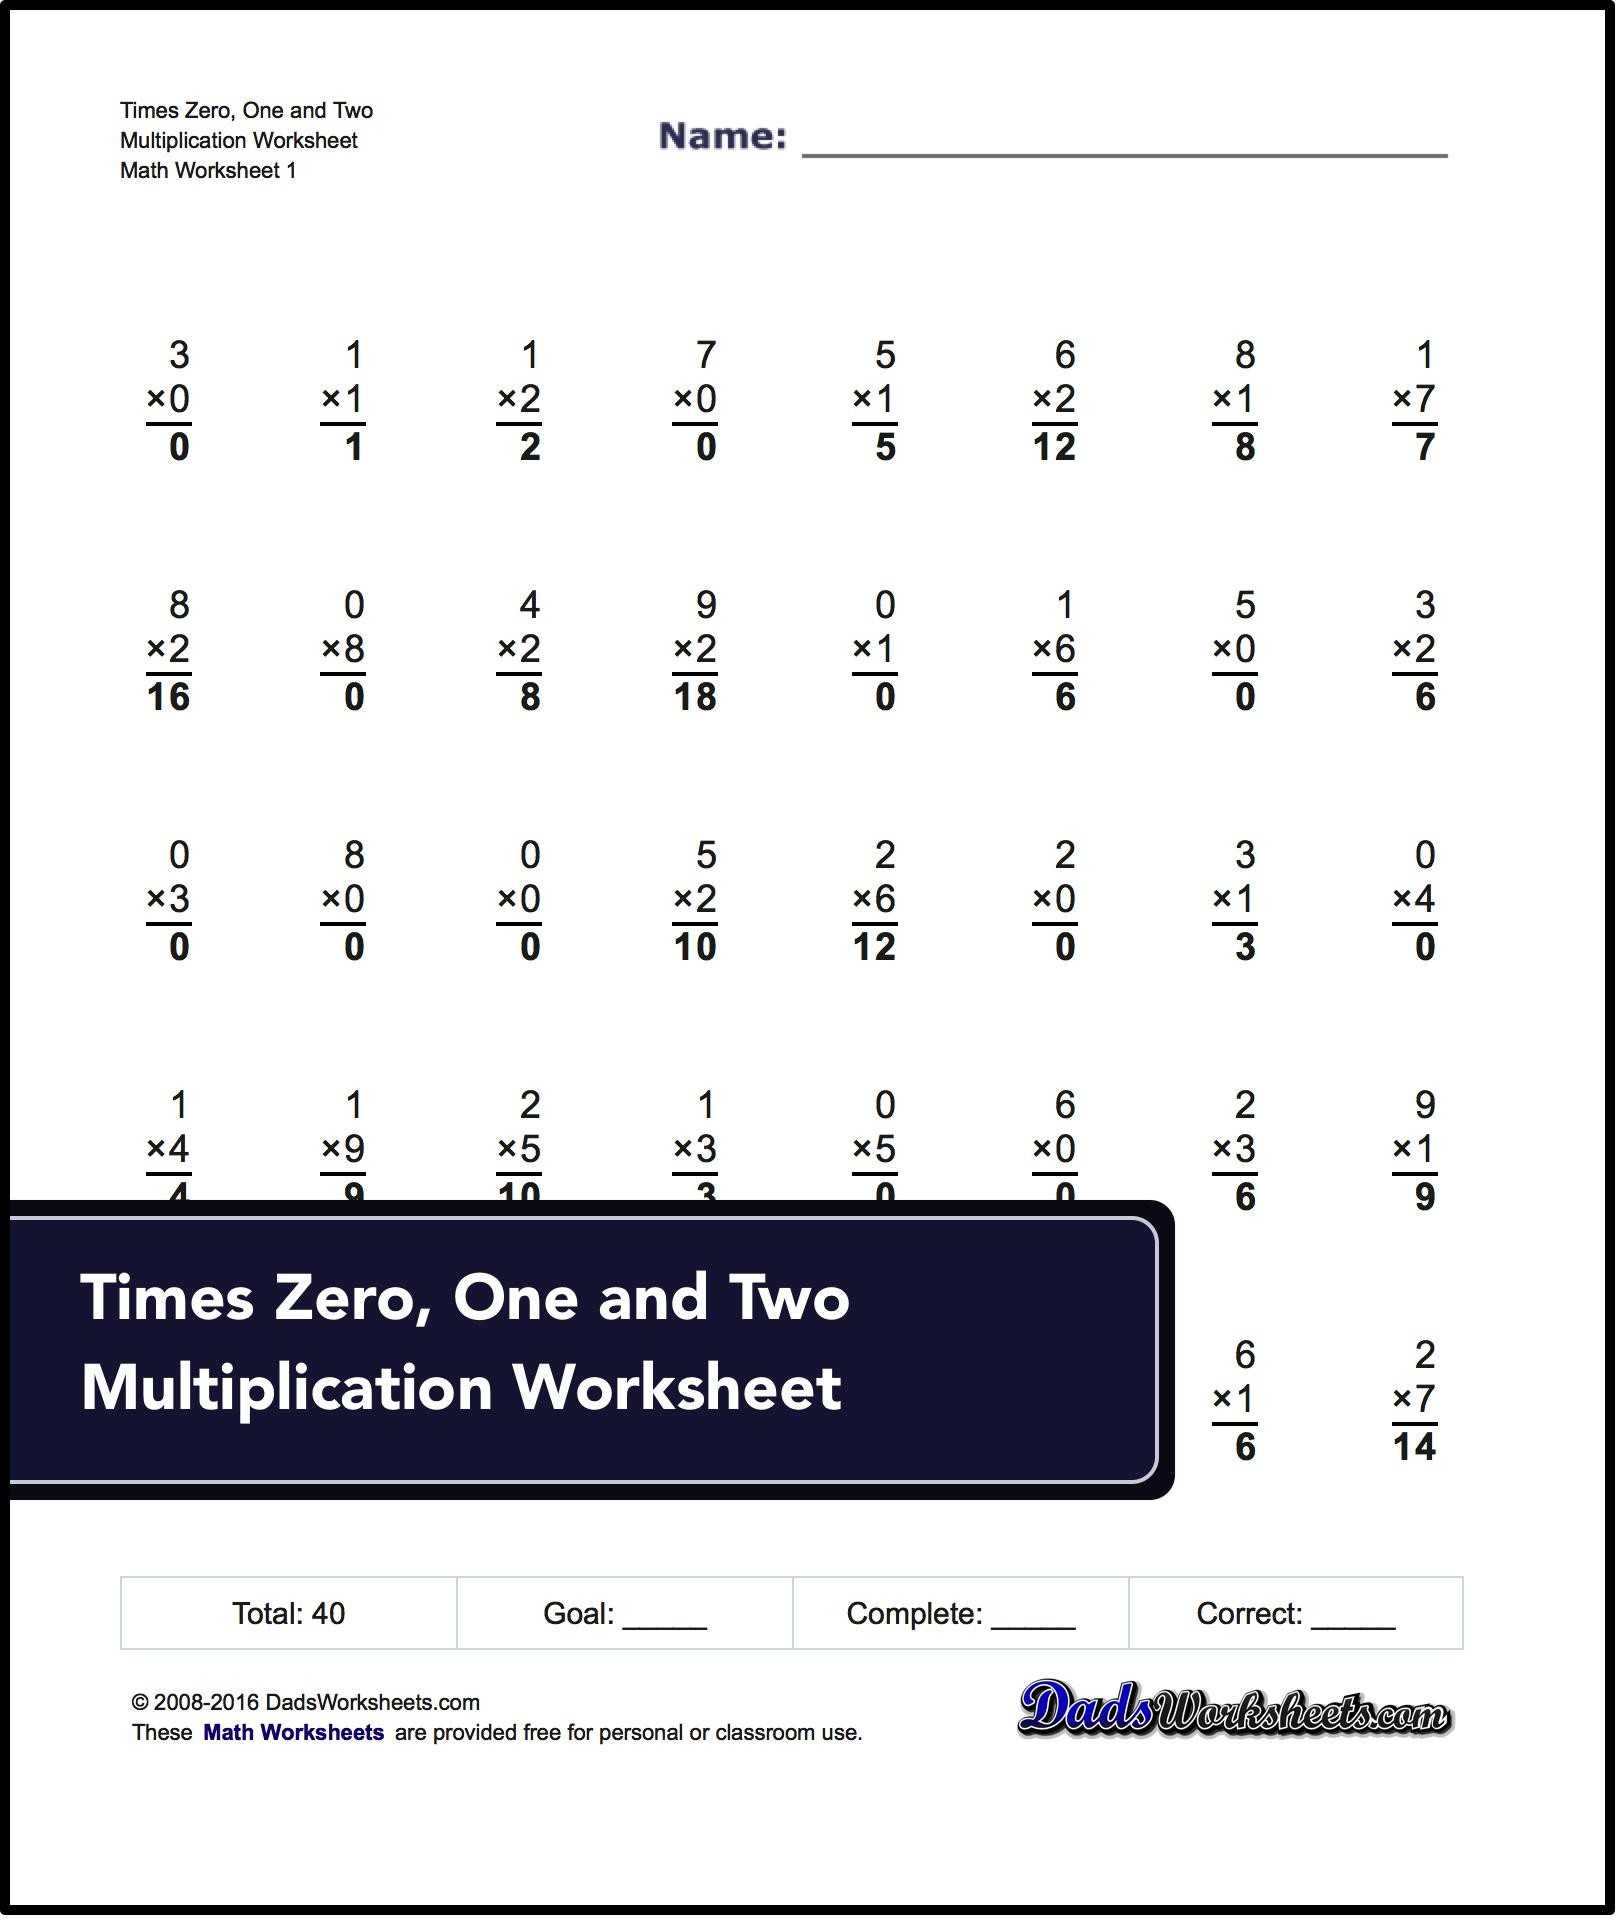 Circles Worksheet Answers with Math Worksheets Time Free New Math About Worksheets